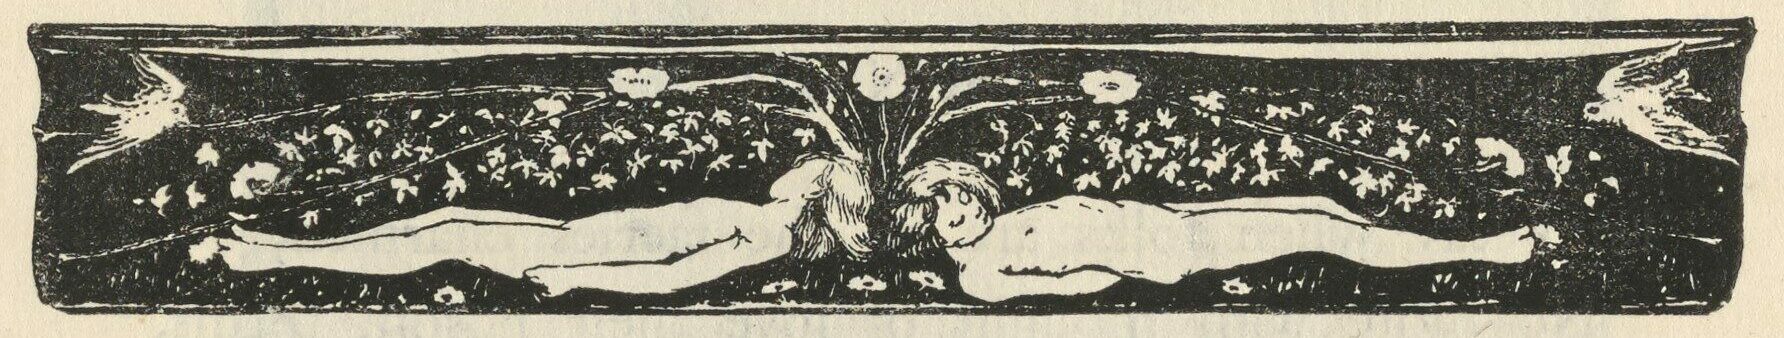 This decorative headpiece is centered on the page, following the text of “A Dream of Angus Oge” and acting as a headpiece illustration for “Friends.” The black rectangular cartouche with white lines depicts two naked figures, lying asleep on the ground, facing in opposite directions. The image is nearly symmetrical, except that the figure on the left faces away from the viewer, while the figure on the right faces towards the viewer. Between their heads, a rose bush sprouts up from the ground; its branches extend over the figures. White flowers and leaves dot the black background. Two birds fly into the frame in each upper corner of the image. The artist’s name is printed outside the picture frame, below the bottom right corner.